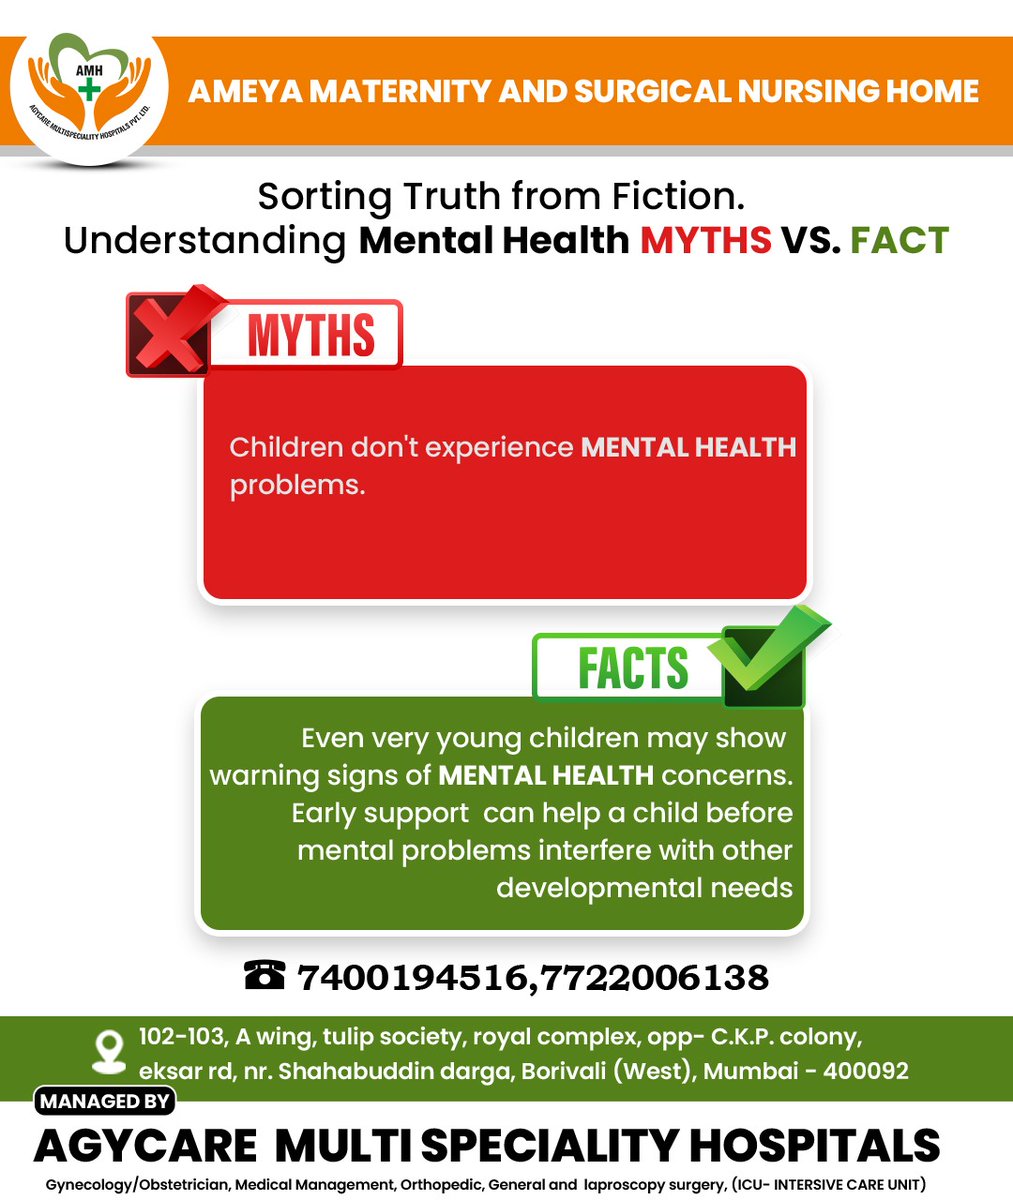 Let's debunk the myths and shed light on the facts surrounding mental health. Knowledge is power when it comes to breaking down barriers and fostering understanding.

For more enquiry: 074001 94516, 7722006138

#MentalHealthMyths #FactsMatter #EndStigma #BreakBarriers